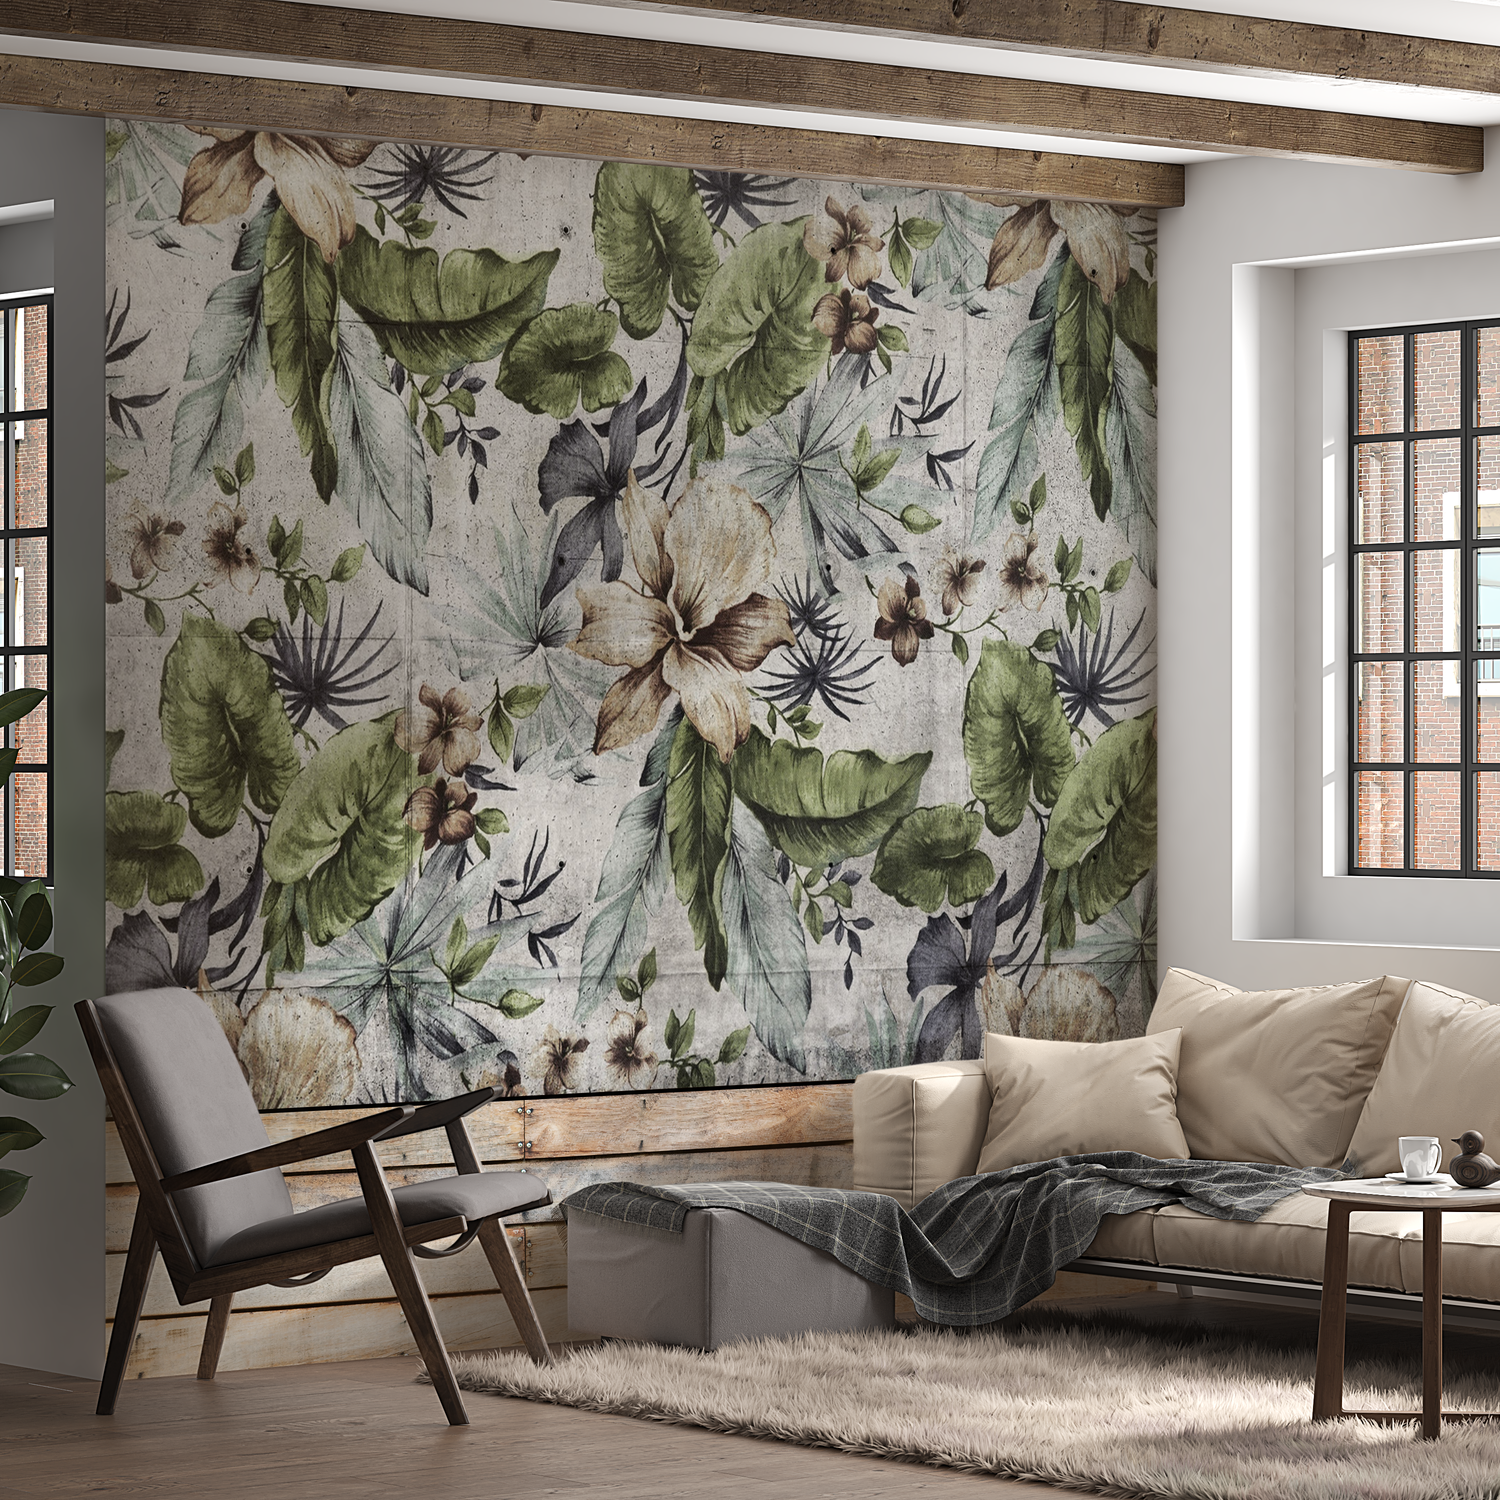 Peel & Stick Botanical Wall Mural - Floral Concrete Wall - Removable Wallpaper 38"Wx27"H